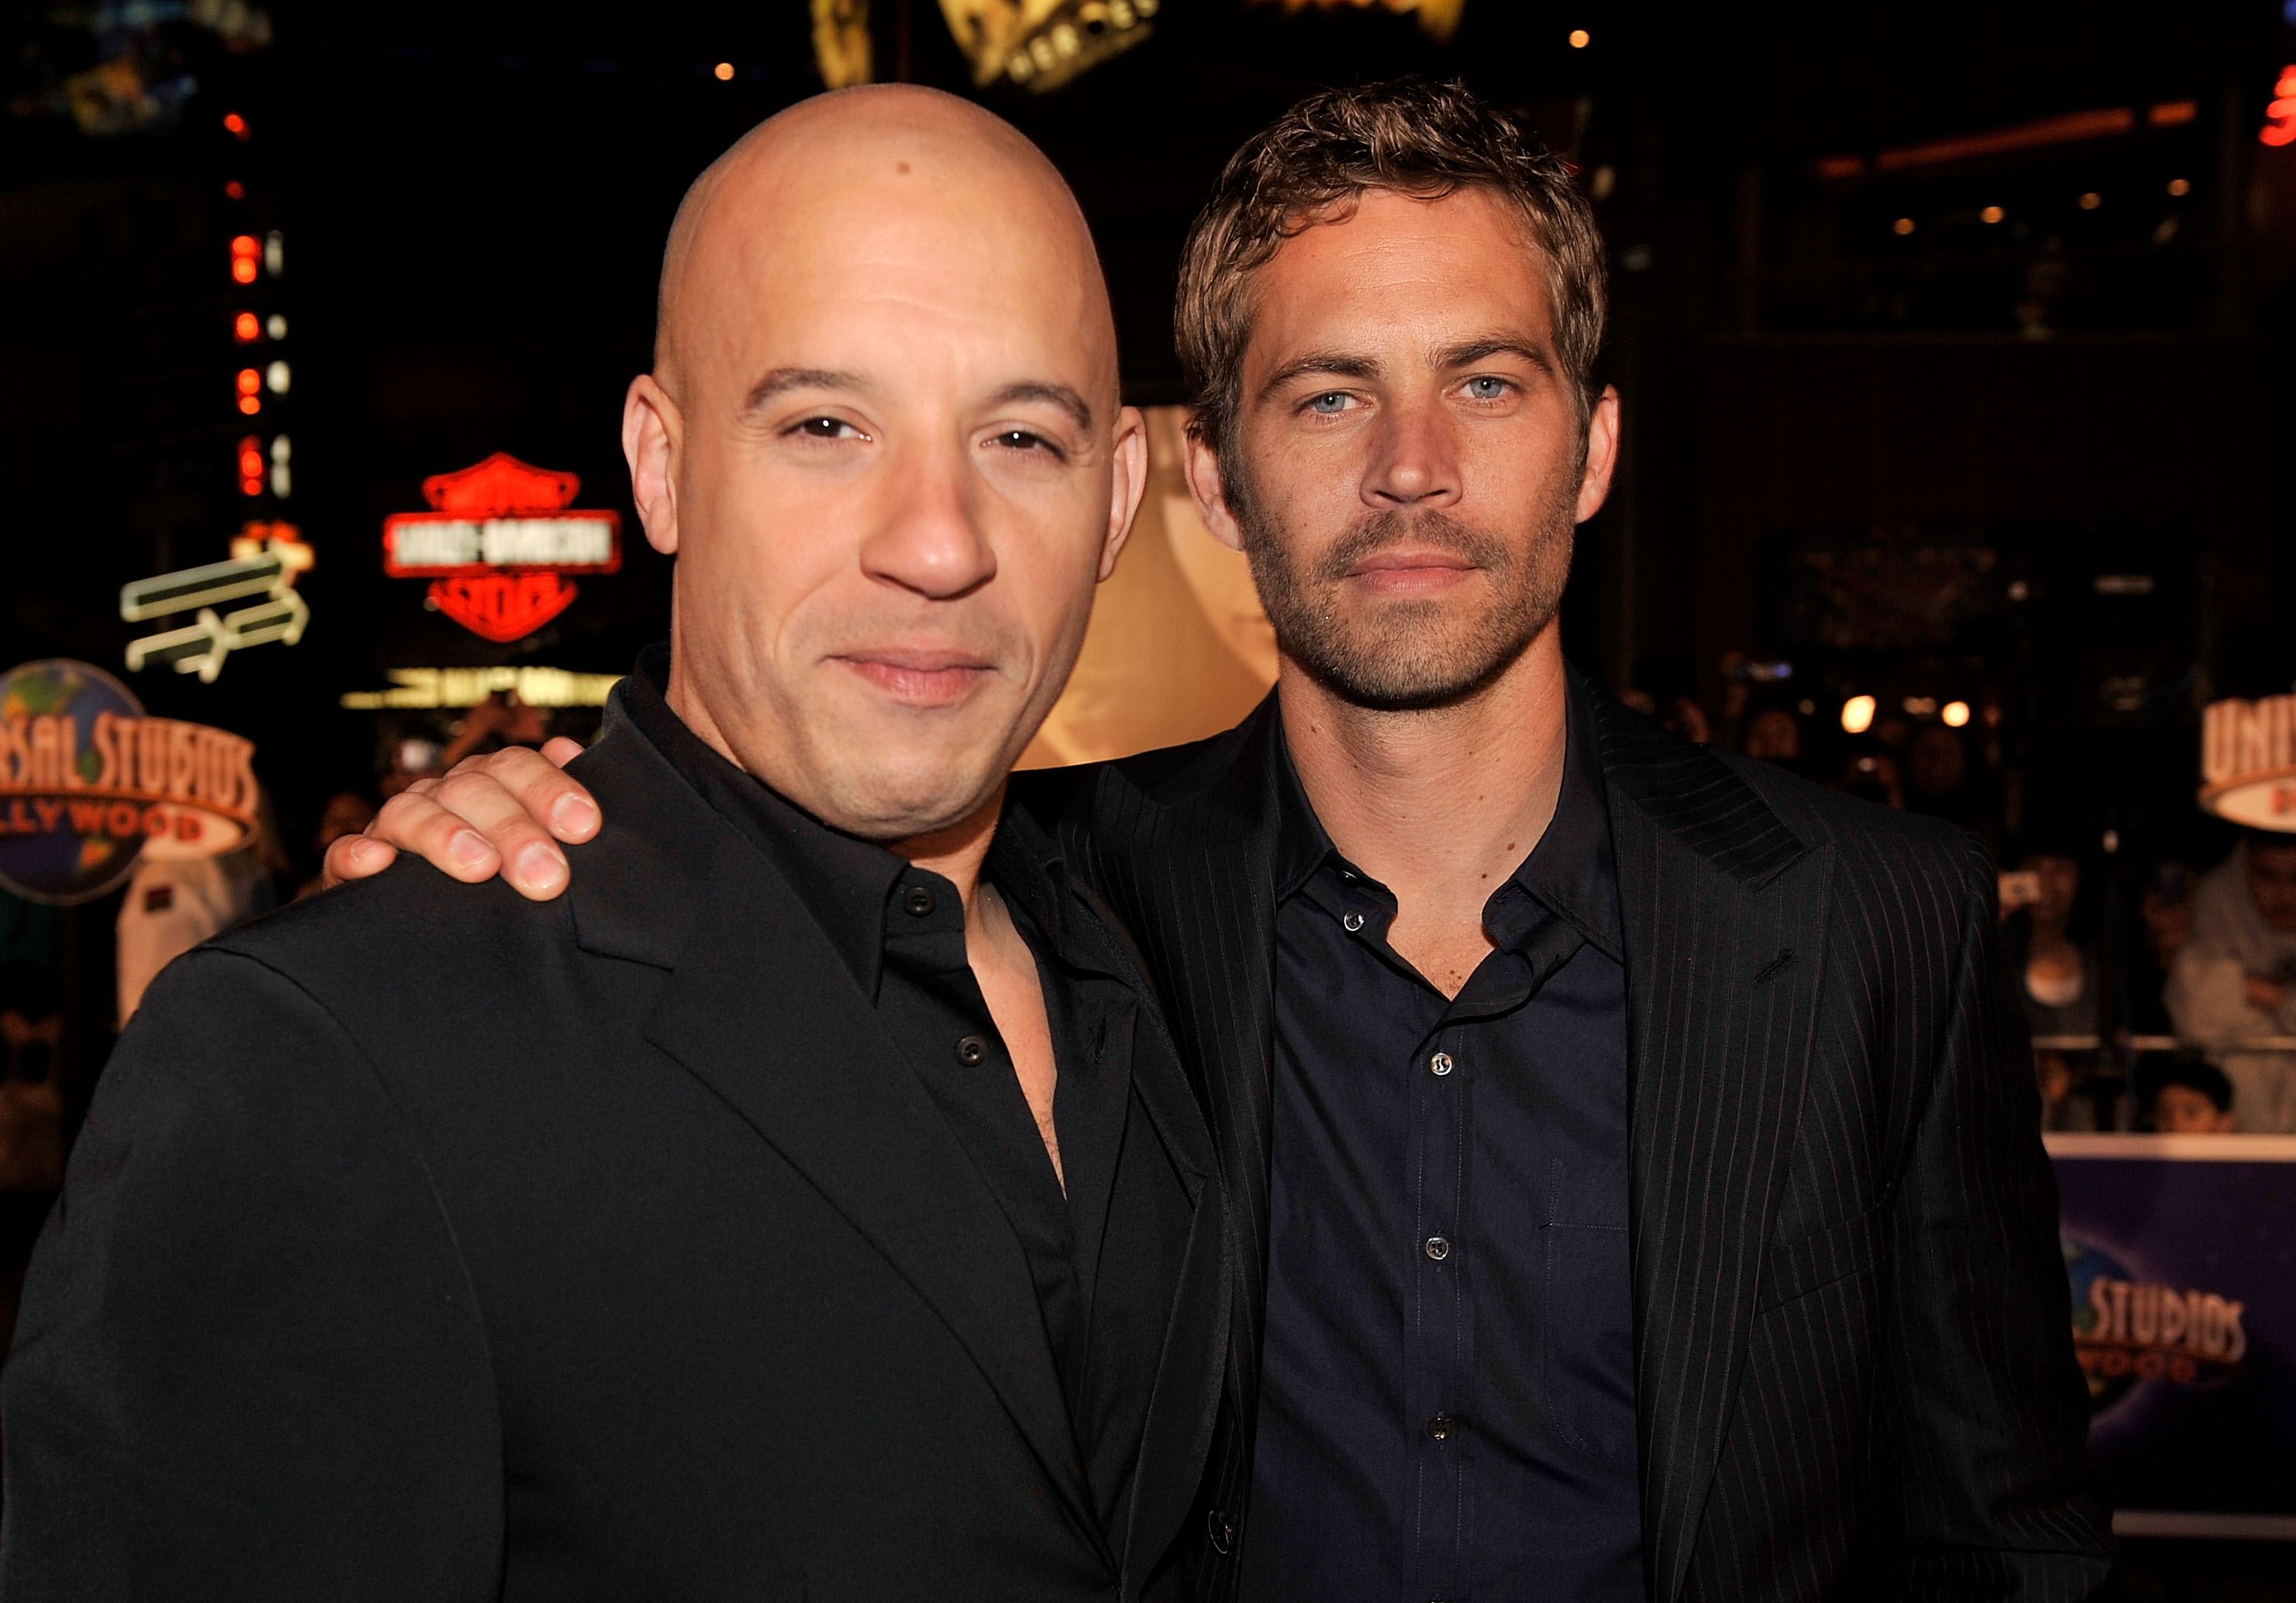 Vin Diesel and Paul Walker at "Fast & Furious" premiere on March 12, 2009 | Source: Getty Images